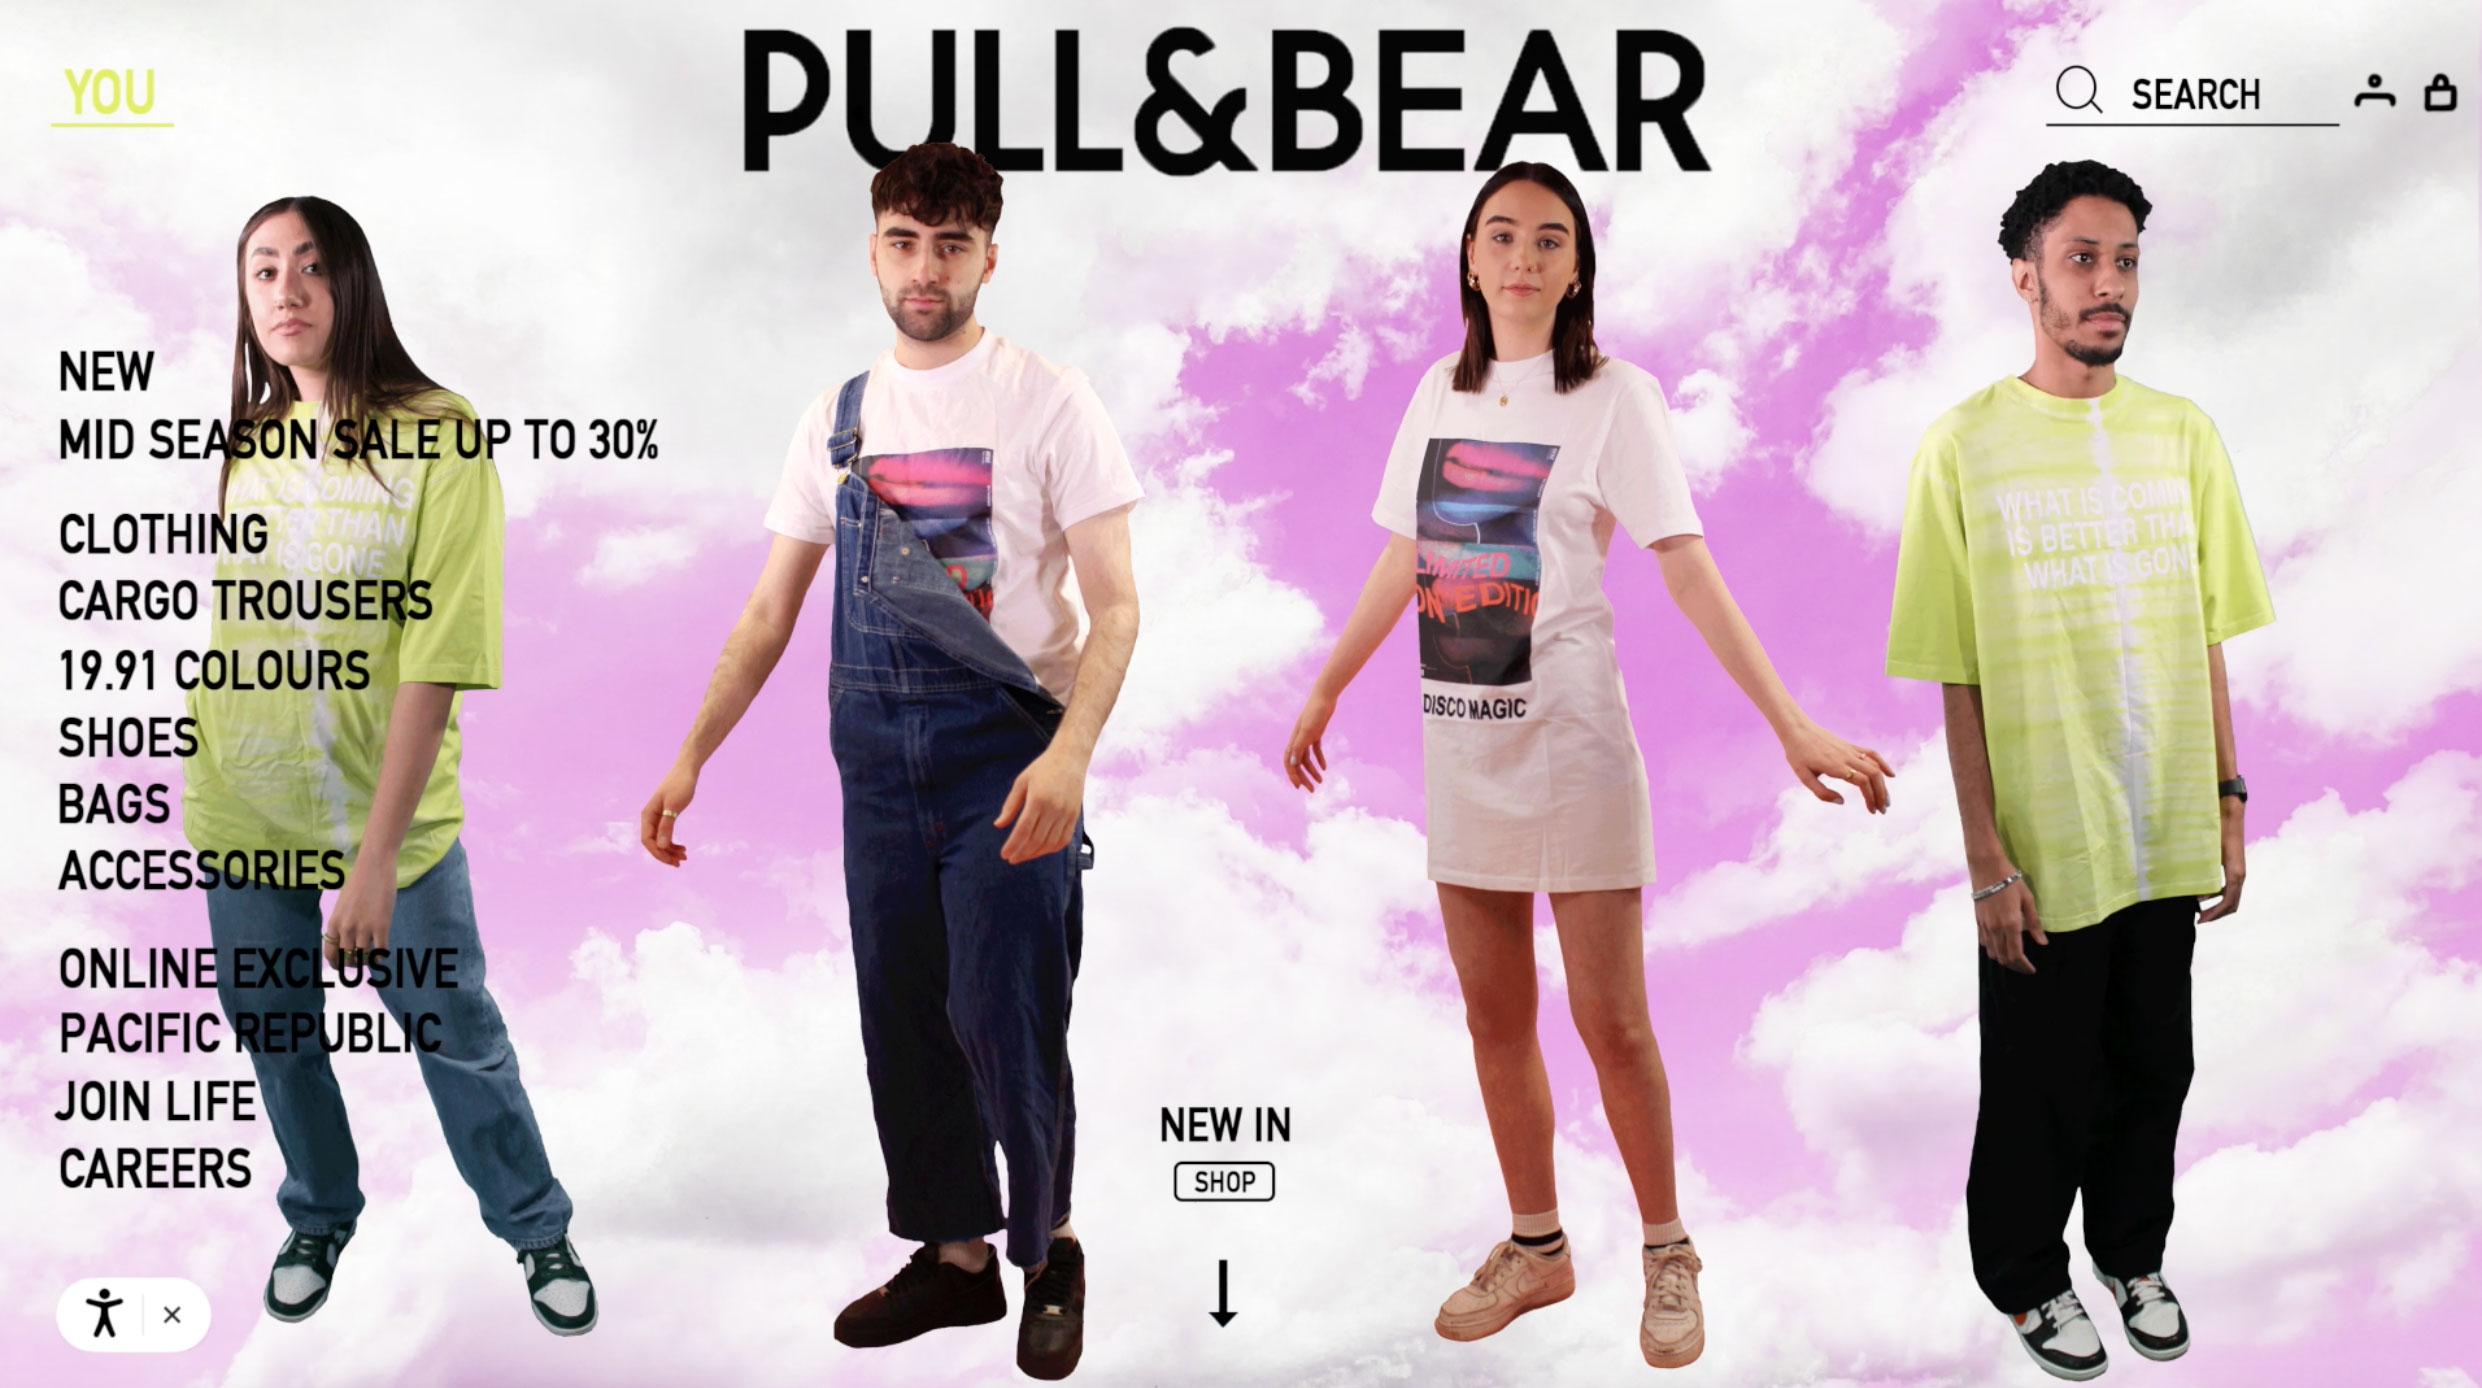 BA Fashion Communication&Promotion work by Ellie Hewitt showing a GIF for Pull&Bear's unisex collection on their website.